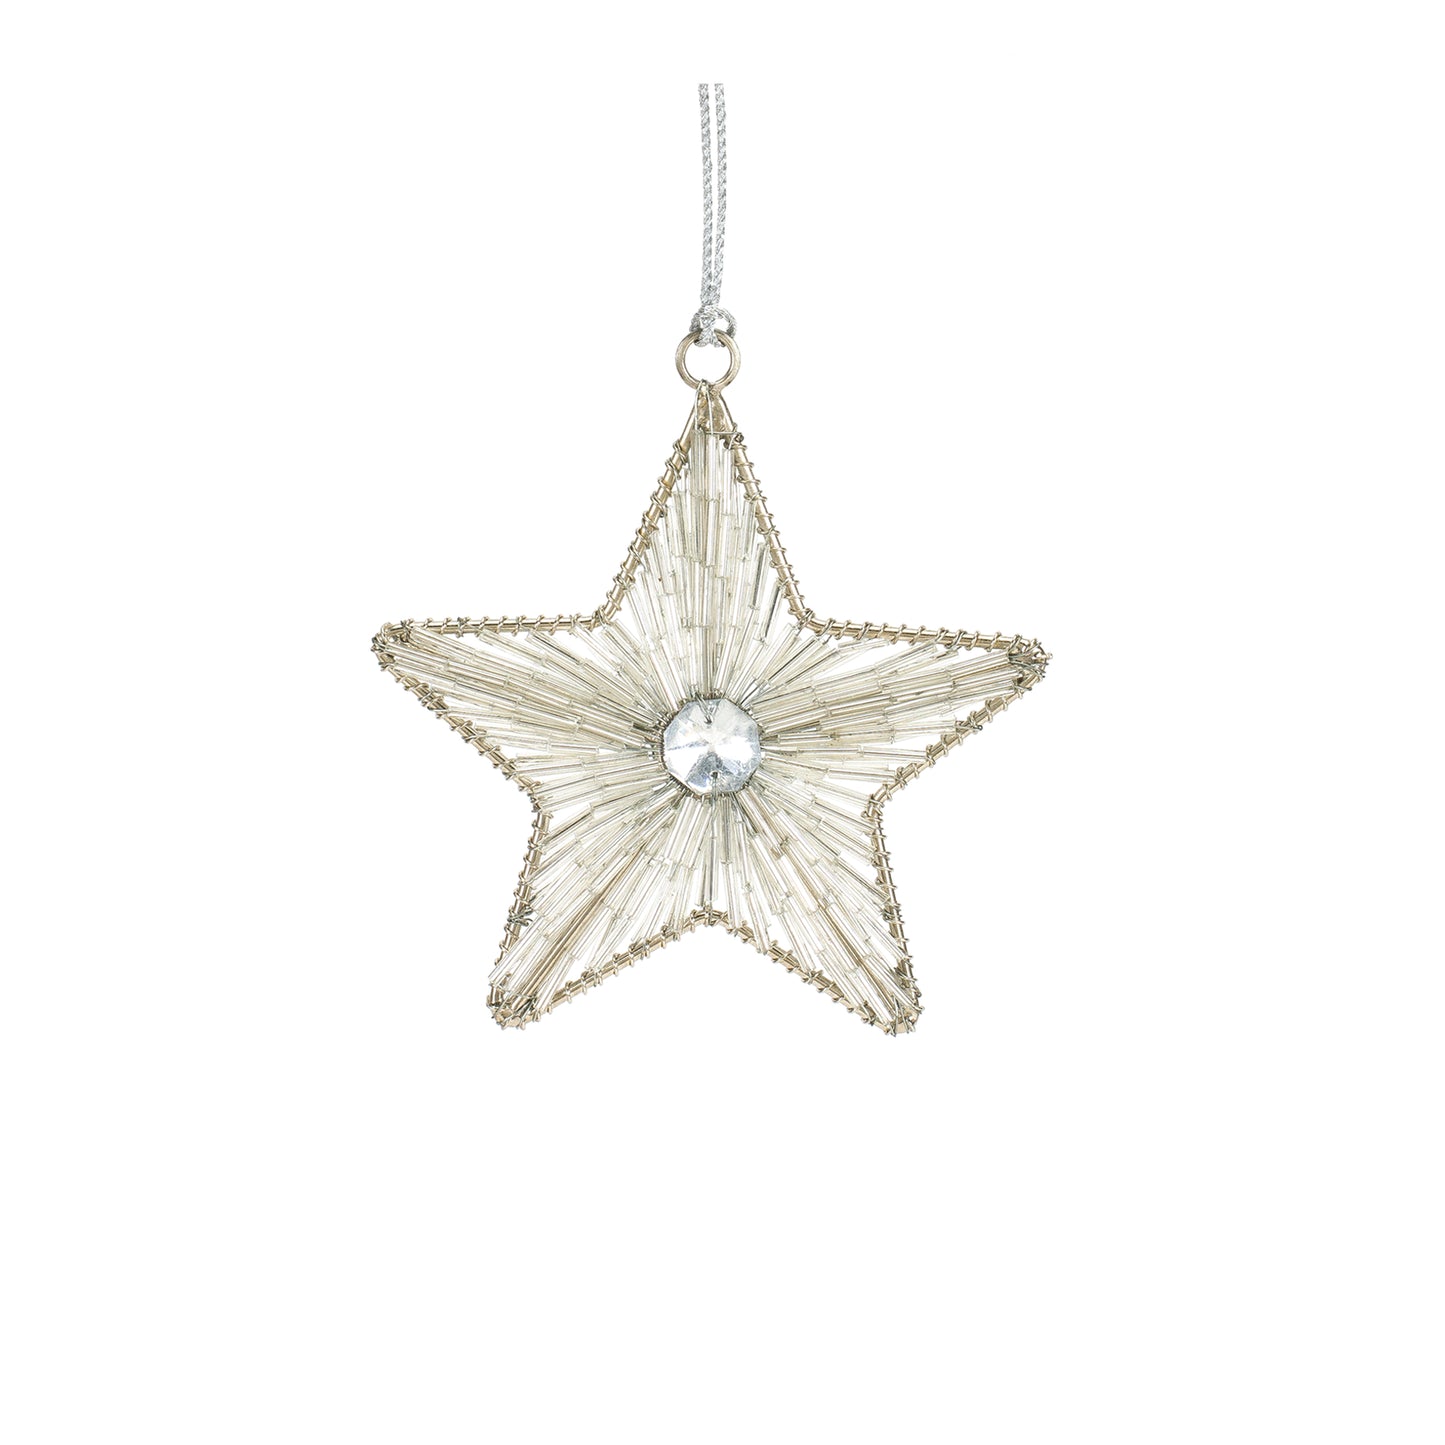 4"H or 5.75"H Star Ornament Iron/Glass Bead Ornament